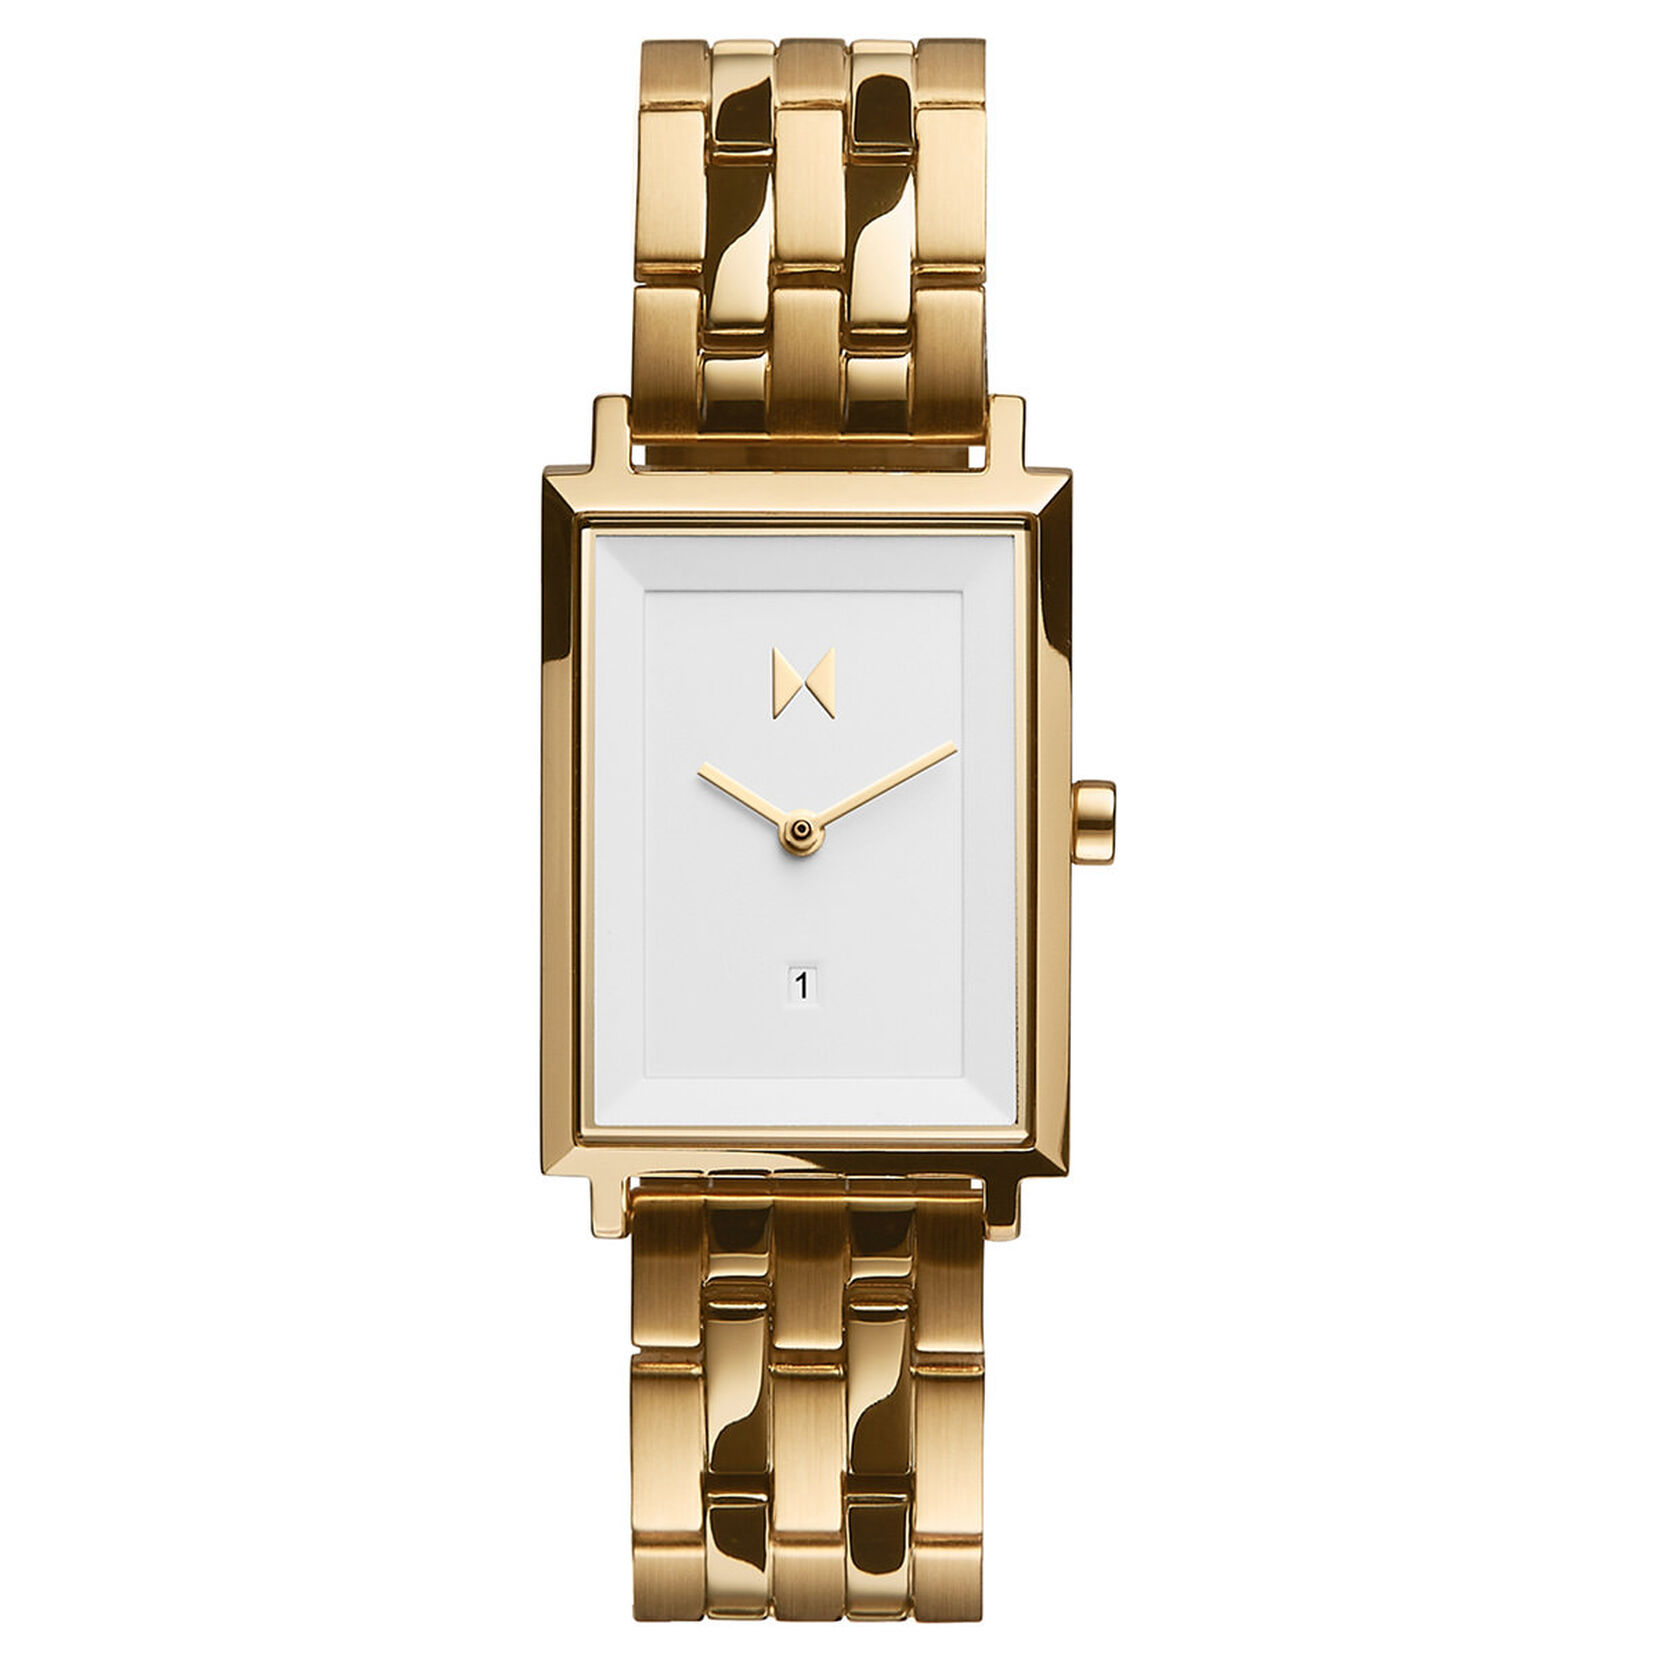 10 Best Square Watches: A Modern Twist on Classic Timepieces